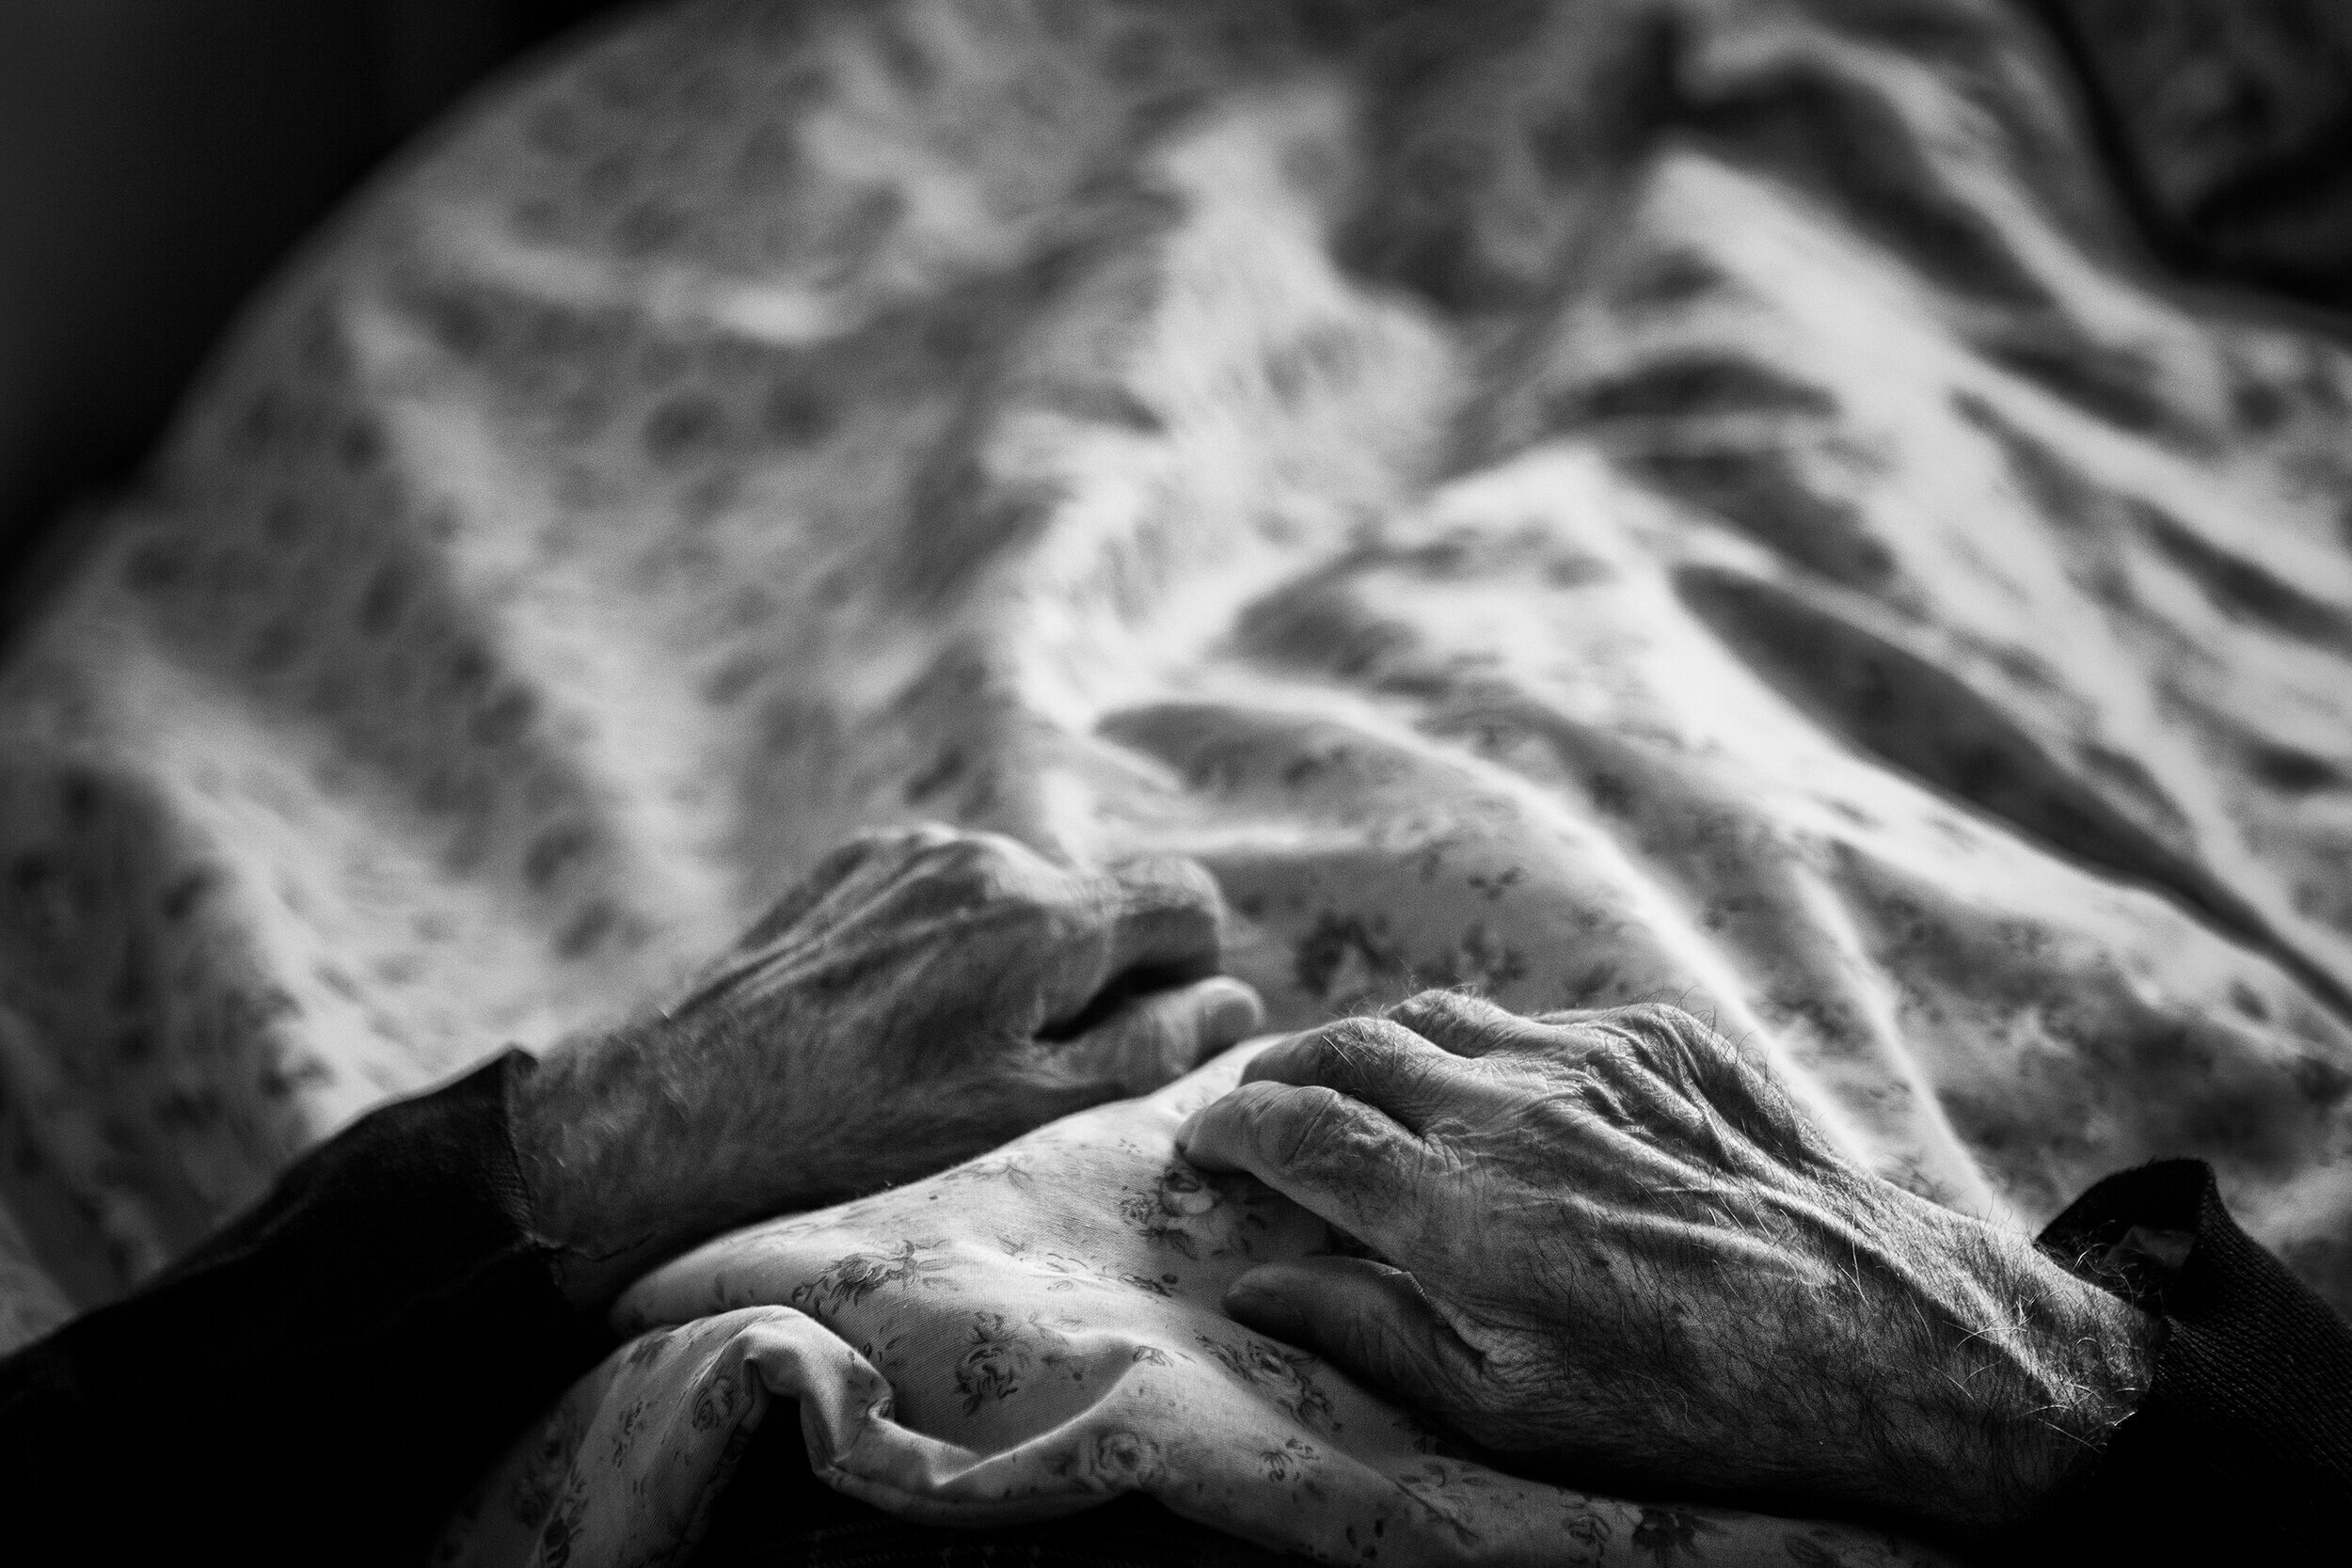  Tabriz, Iran. The slim hands of my father on a blanket as he sleeps. These hands are part of our country’s history to me and reminds me of the hardships he resists for his family for many years. 